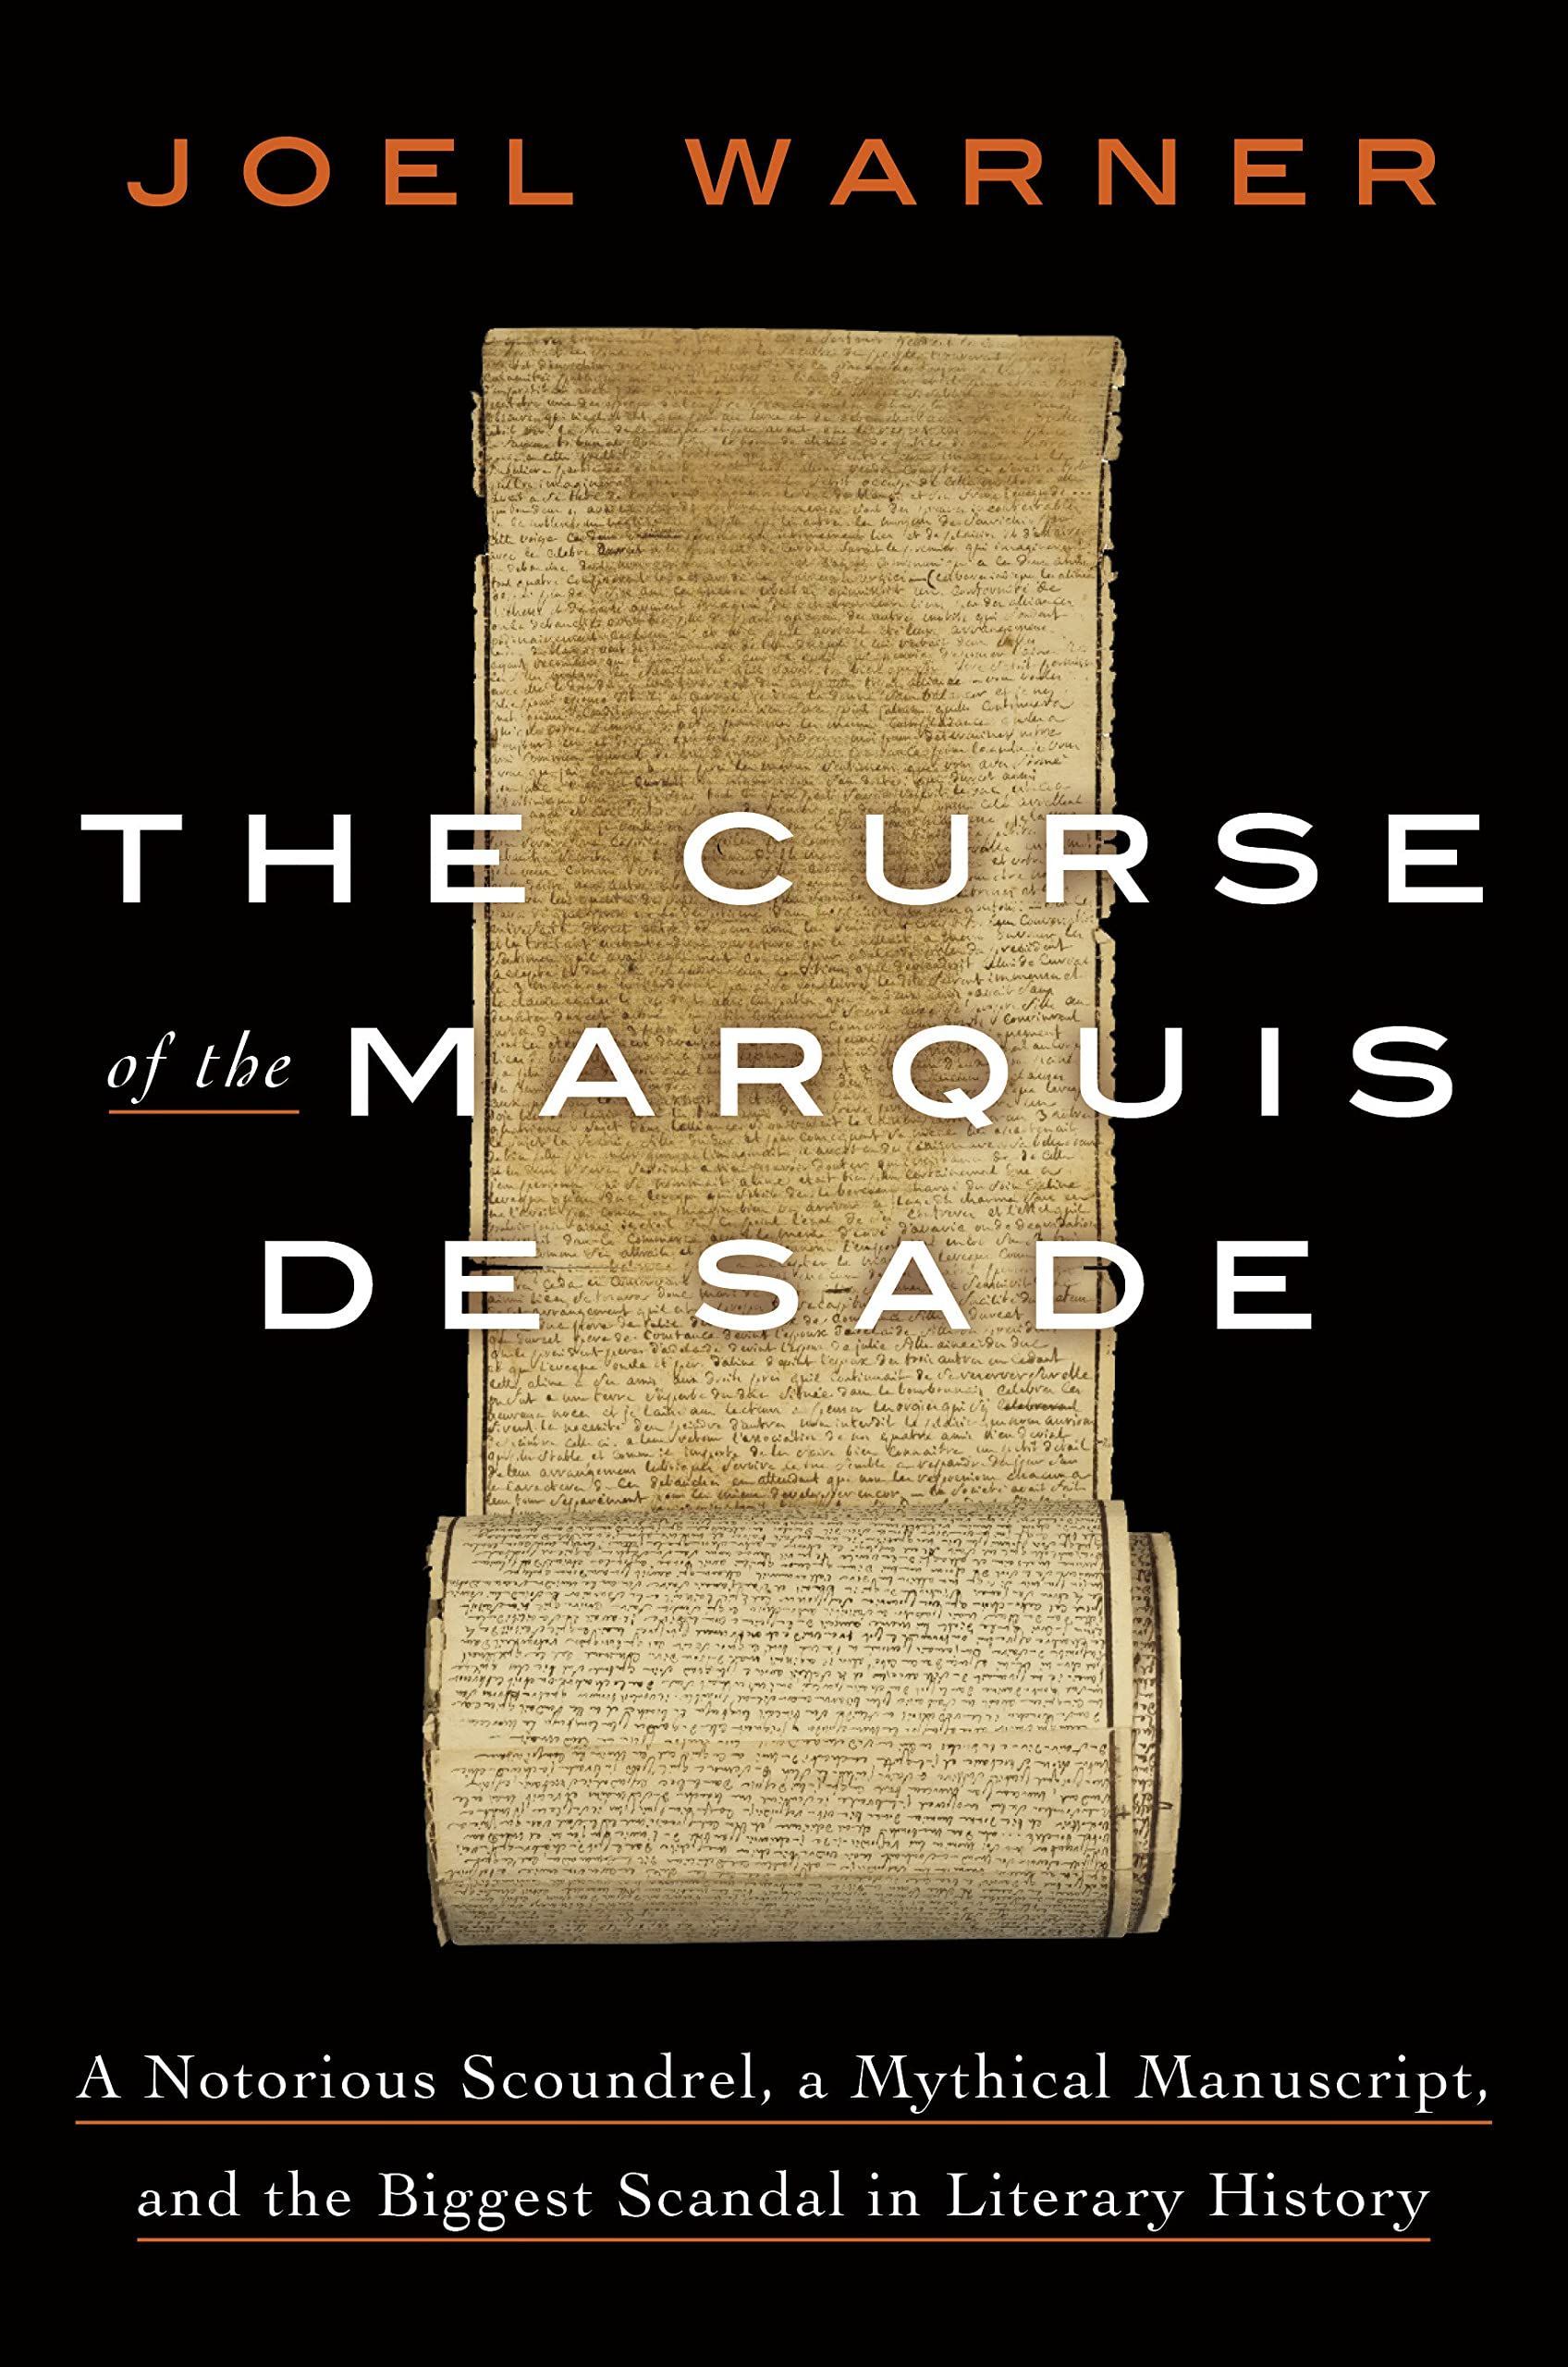 A Tale of Literary and Financial Debauchery: On Joel Warner’s “The Curse of the Marquis de Sade”